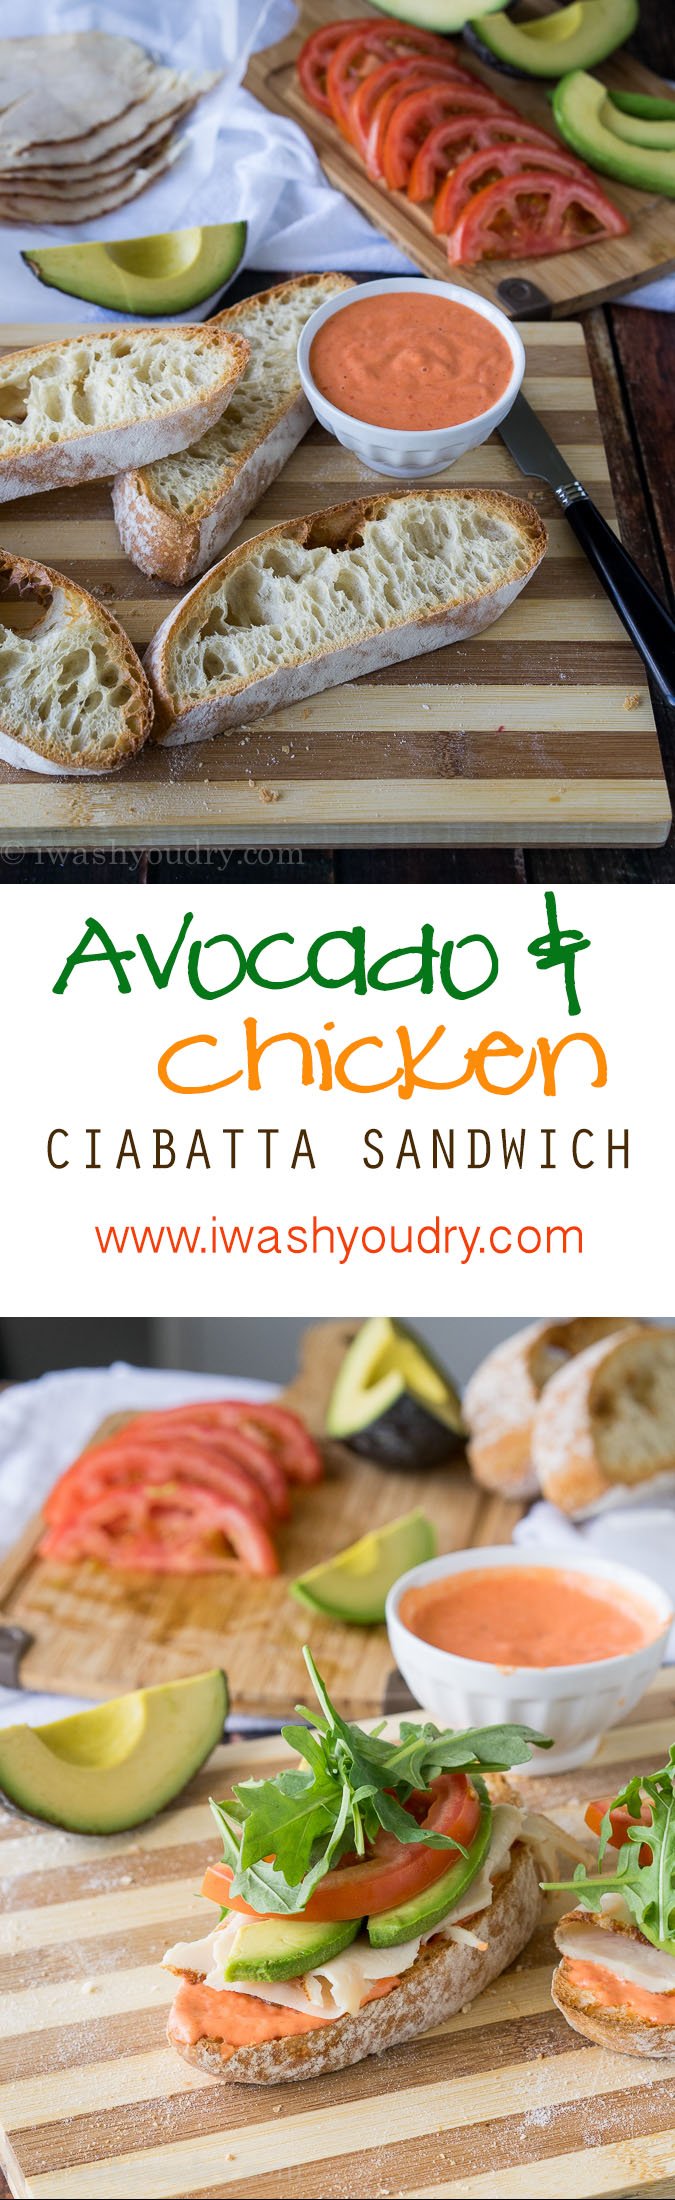 Avocado and Chicken Ciabatta Sandwich with a roasted red pepper aioli! So easy and super delicious!